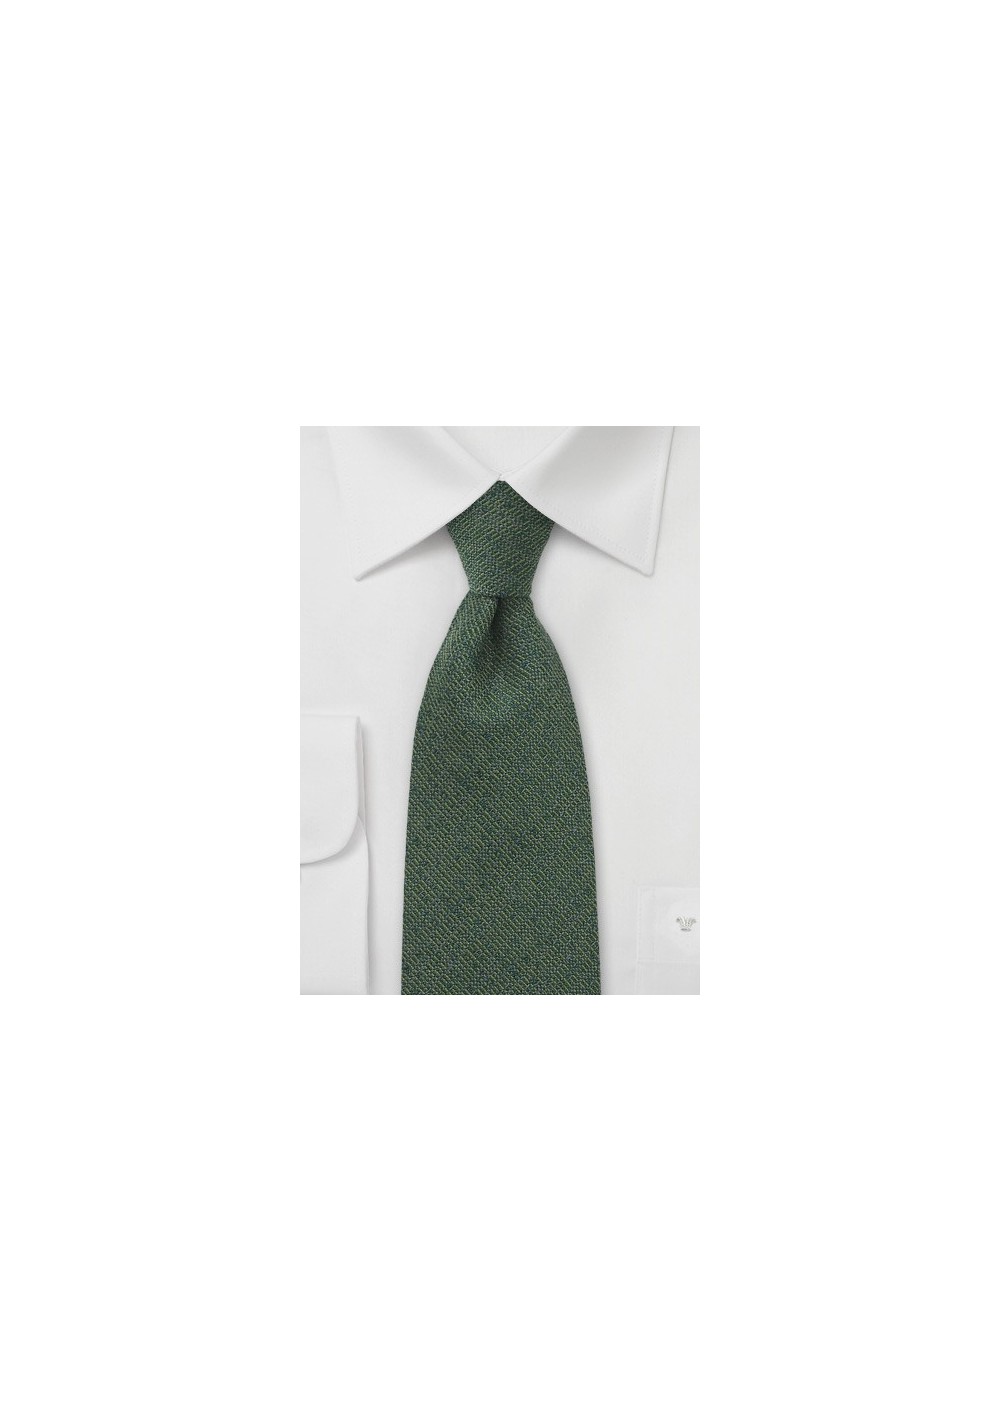 XL Length Tie in Olive Green with Texture